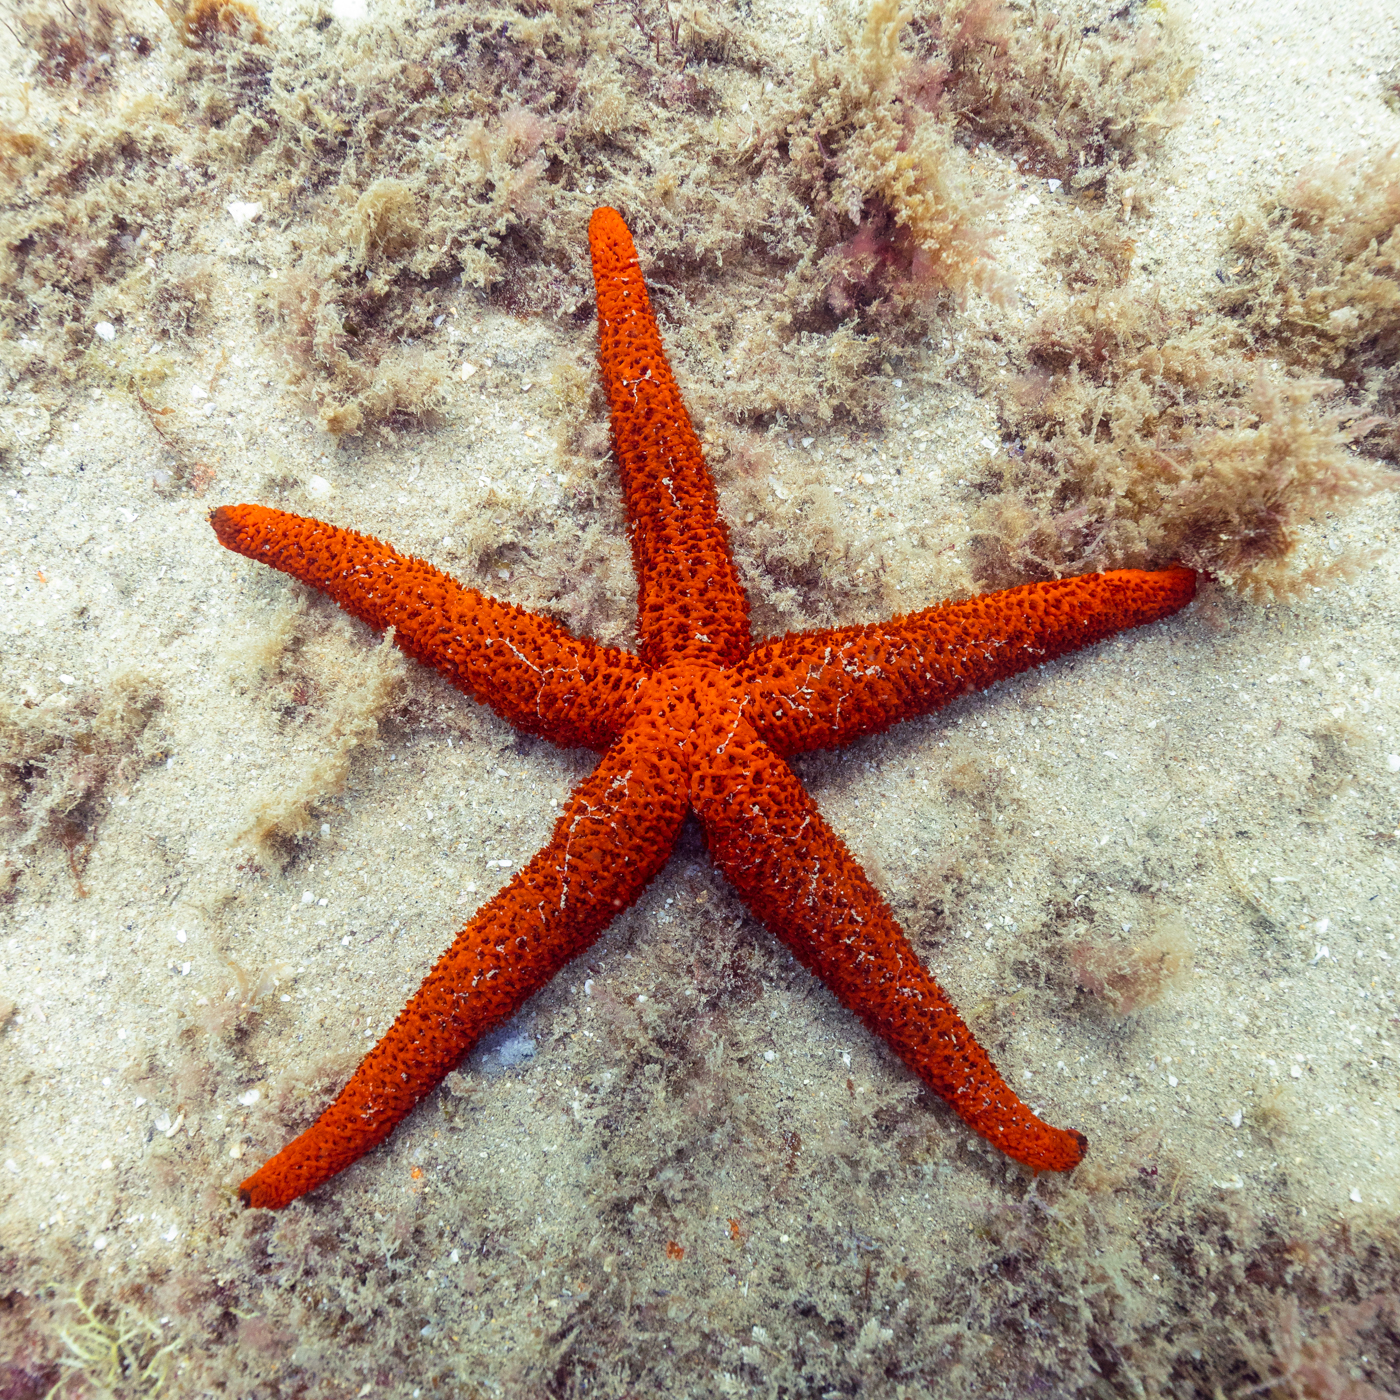 Mediterranean red sea star (Echinaster sepositus), Arrábida Natural Park, Portugal. The approx size of each arm is 10 centimetres (3.9 in).